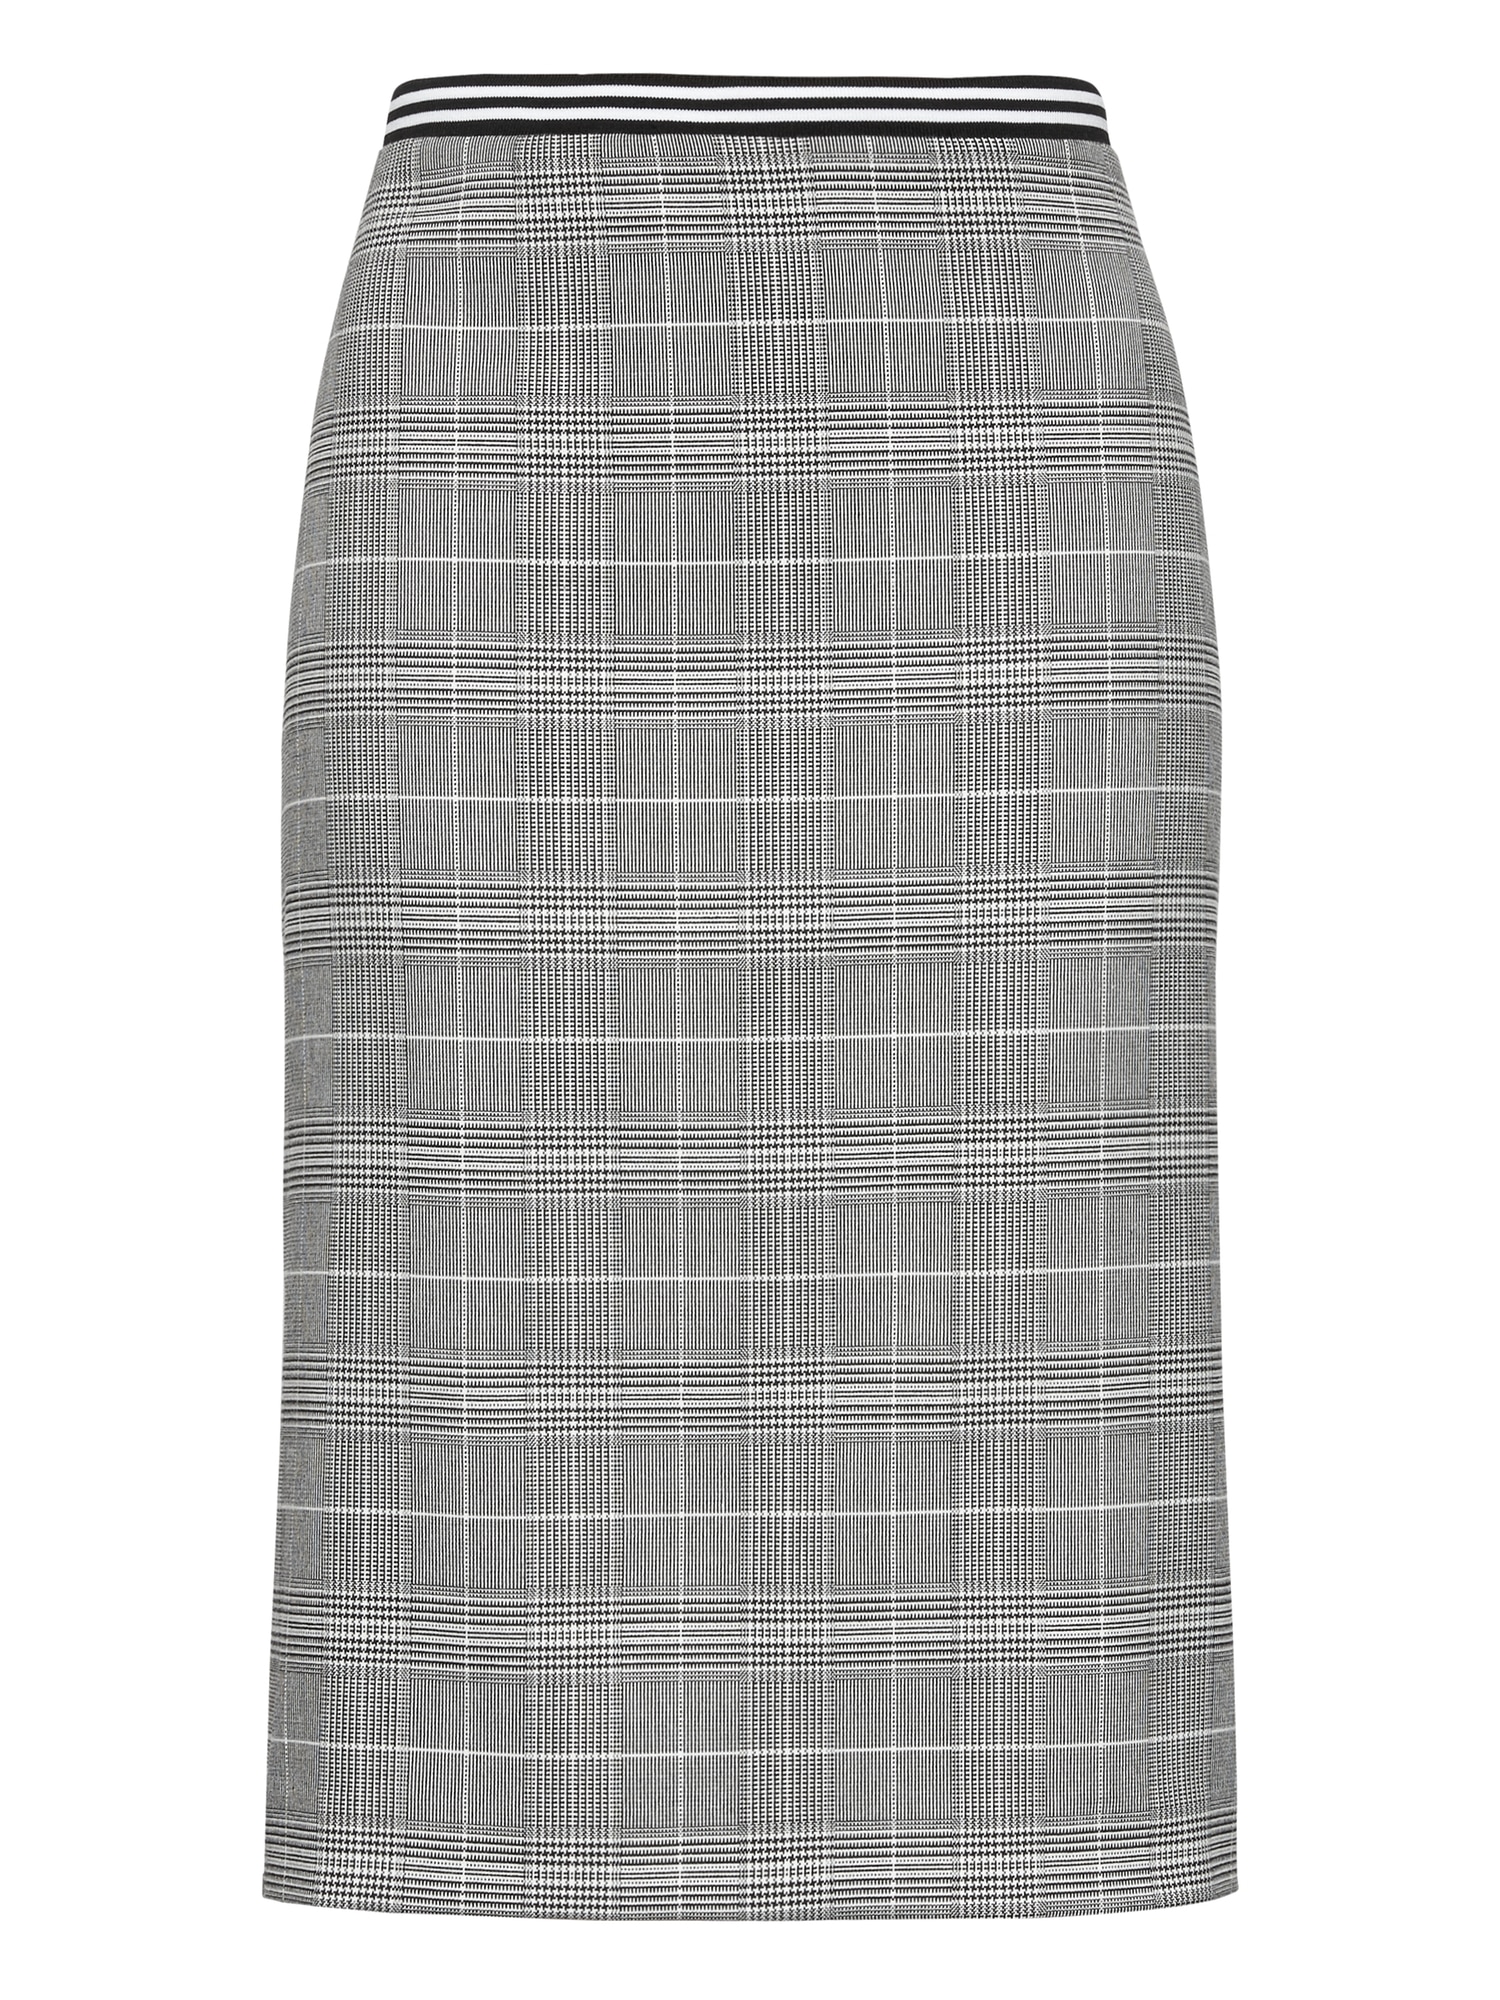 Petite Plaid Pencil Skirt with Vented Sides